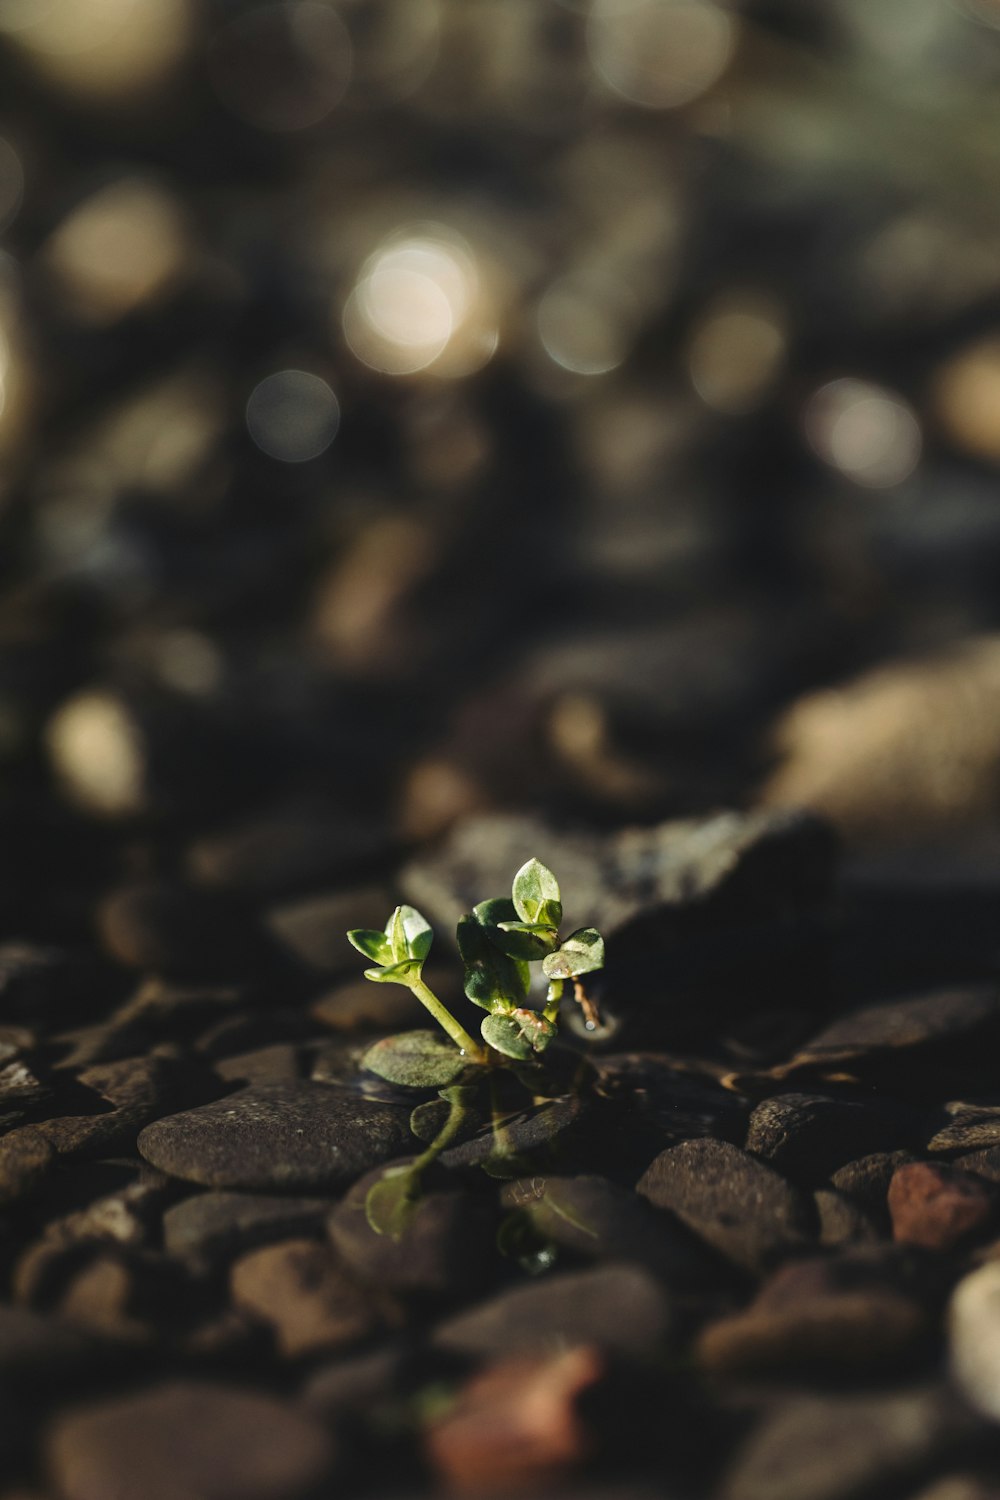 green young plant sprouting on rocks